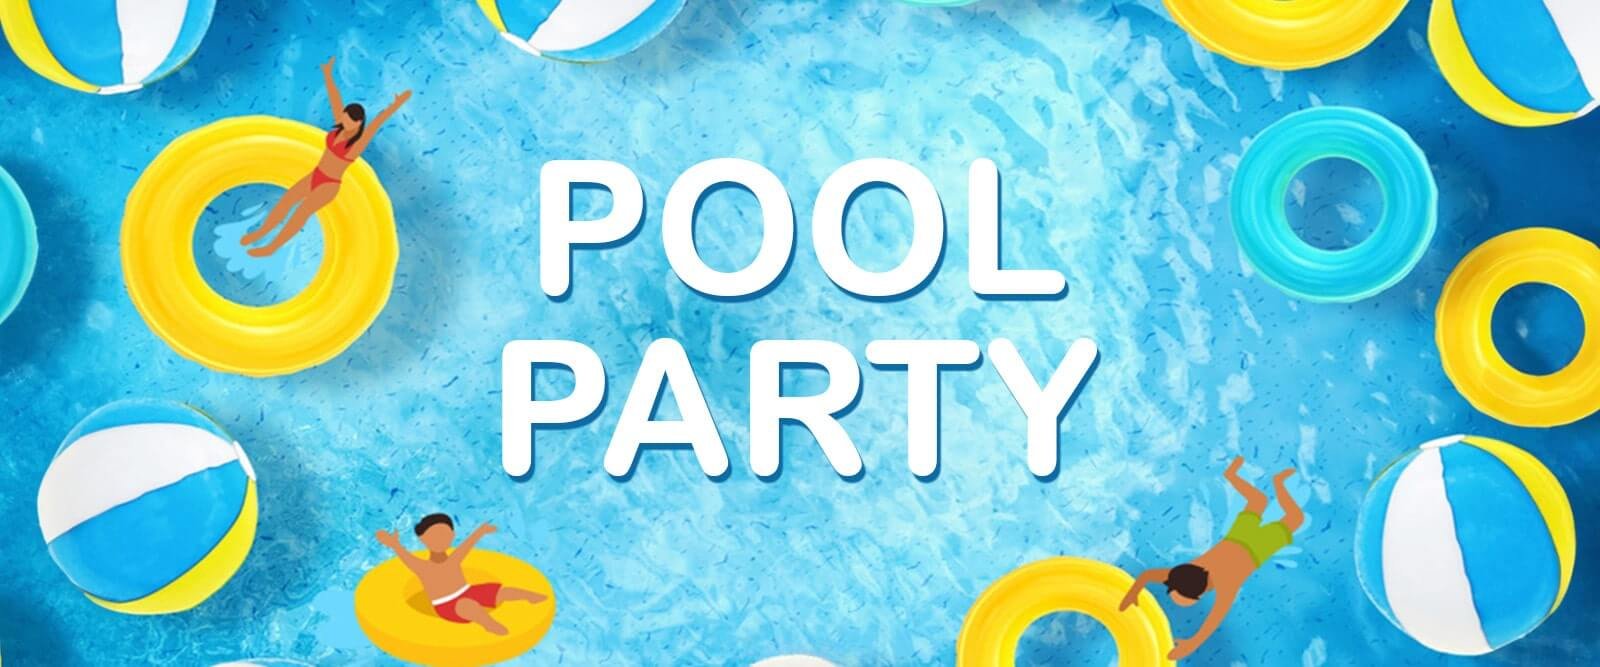 pool-party-banner